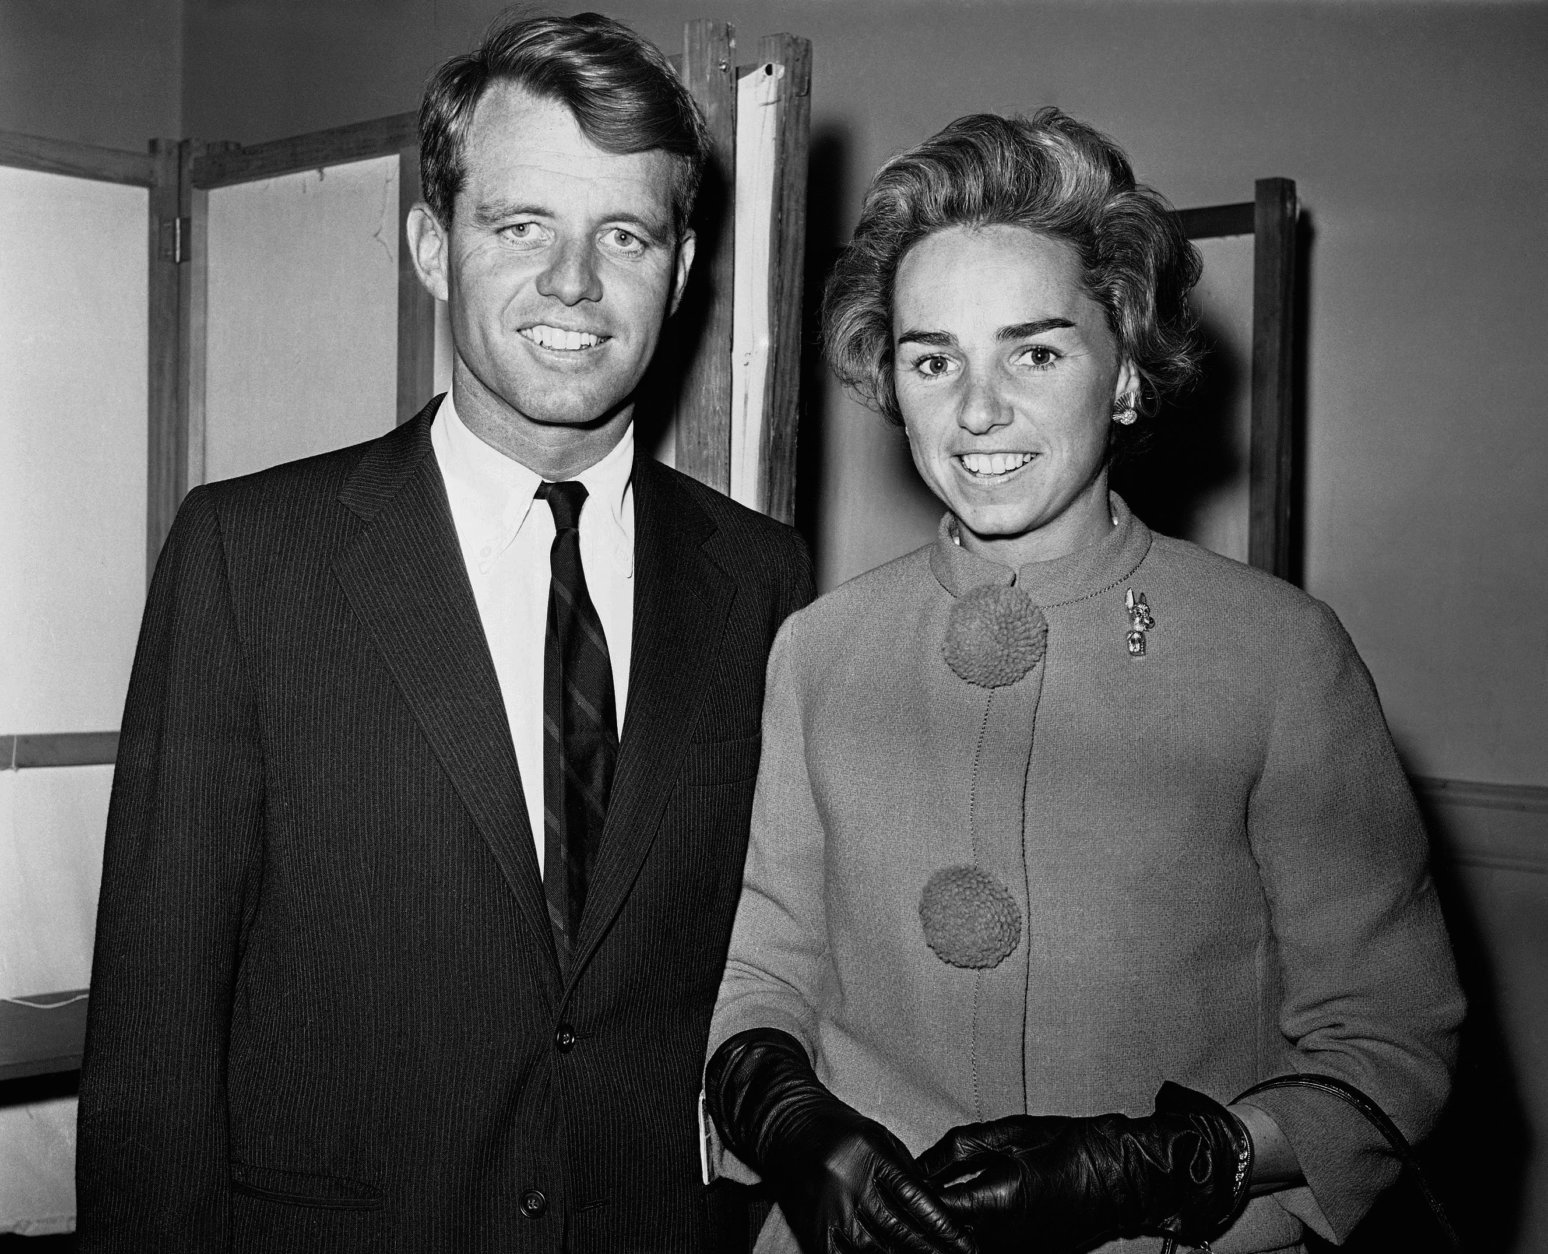 Robert F. Kennedy, brother of Sen. John F. Kennedy, is shown with his wife, Ethel, as they arrived to vote in the town of Barnstable, Mass., Nov. 8, 1960. (AP Photo)